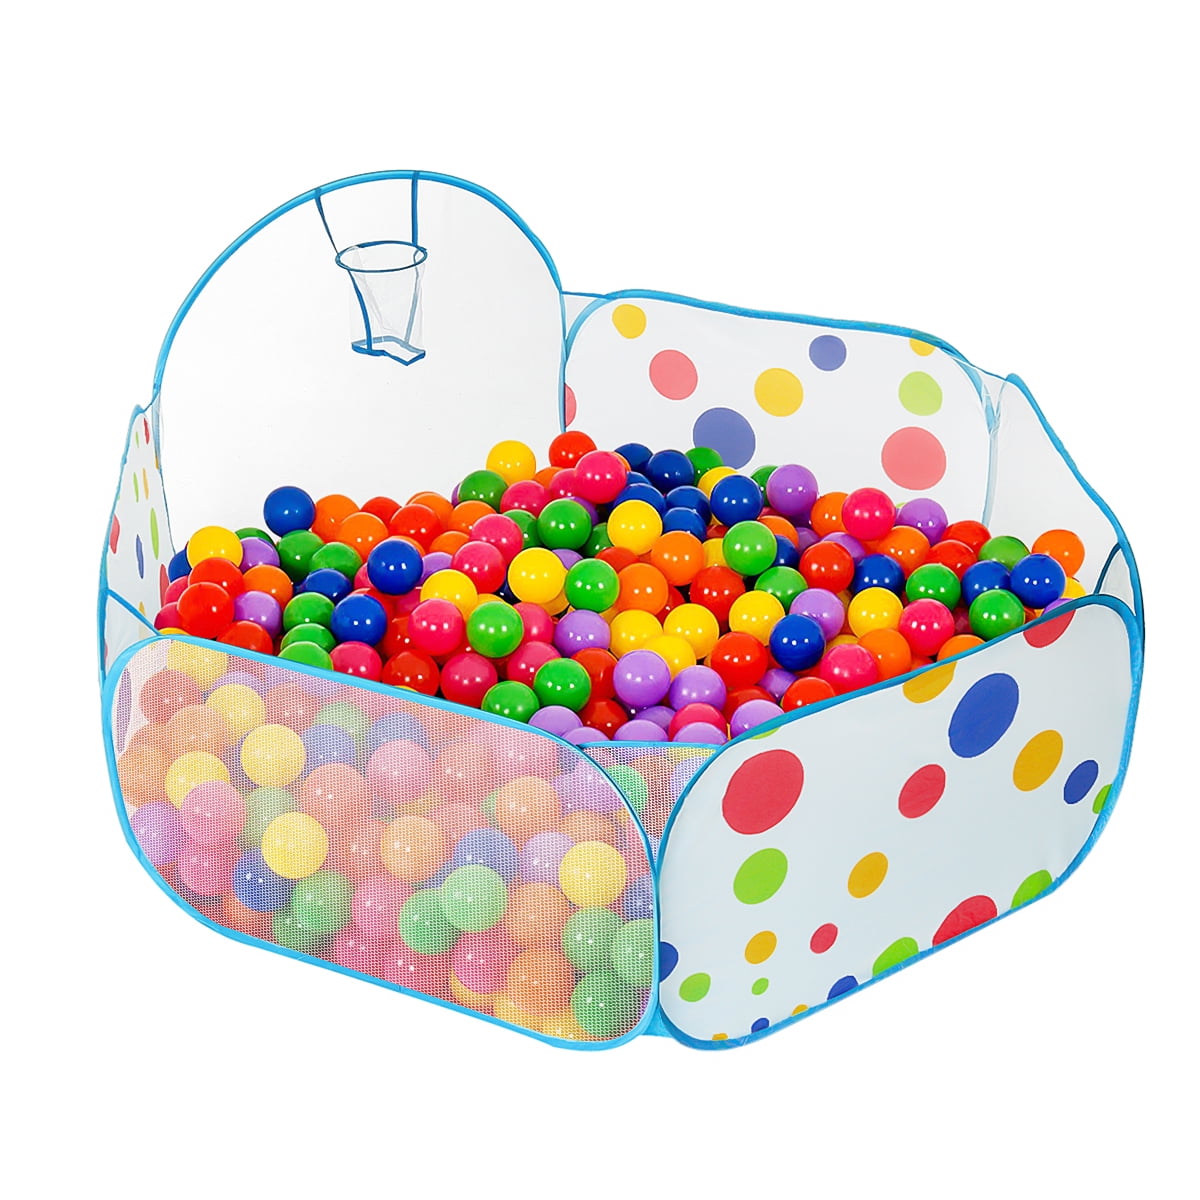 Balls not Included 4 Ft Sea Ball Pool for Indoor Outdoor Portable Baby Ball Pit Toddler Ball Tent Foldable Kids Play House with Basketball Hoop & Zippered Storage Bag 